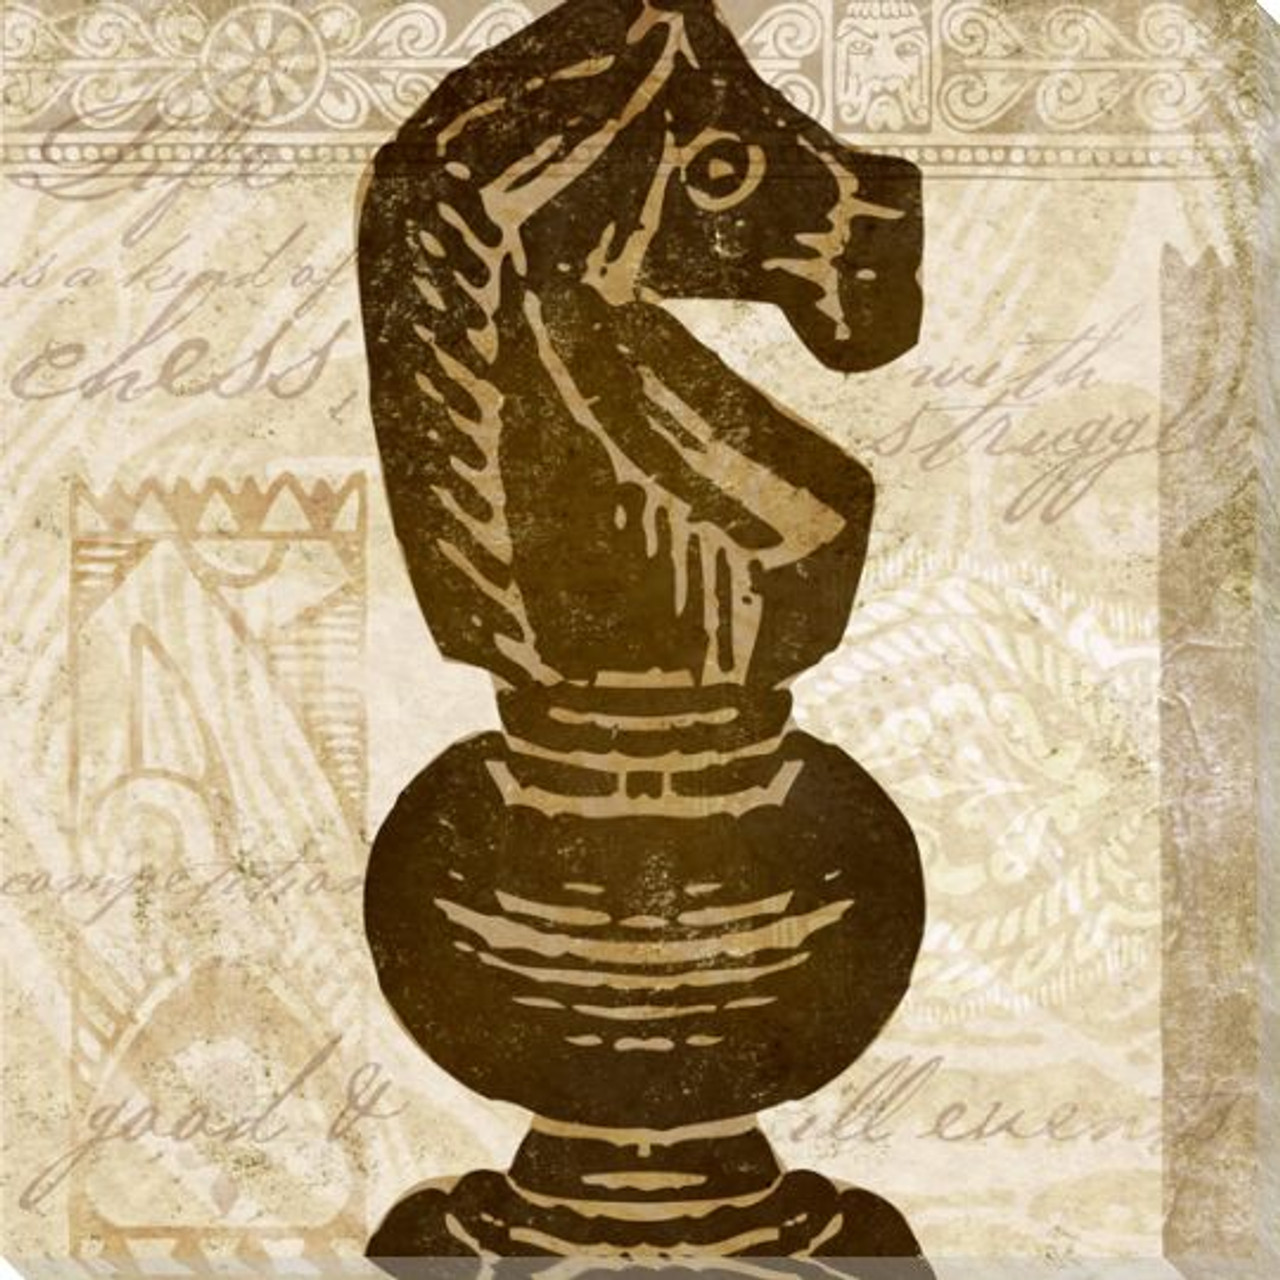 Knight Chess Pieces Poster by Ktsdesign - Fine Art America